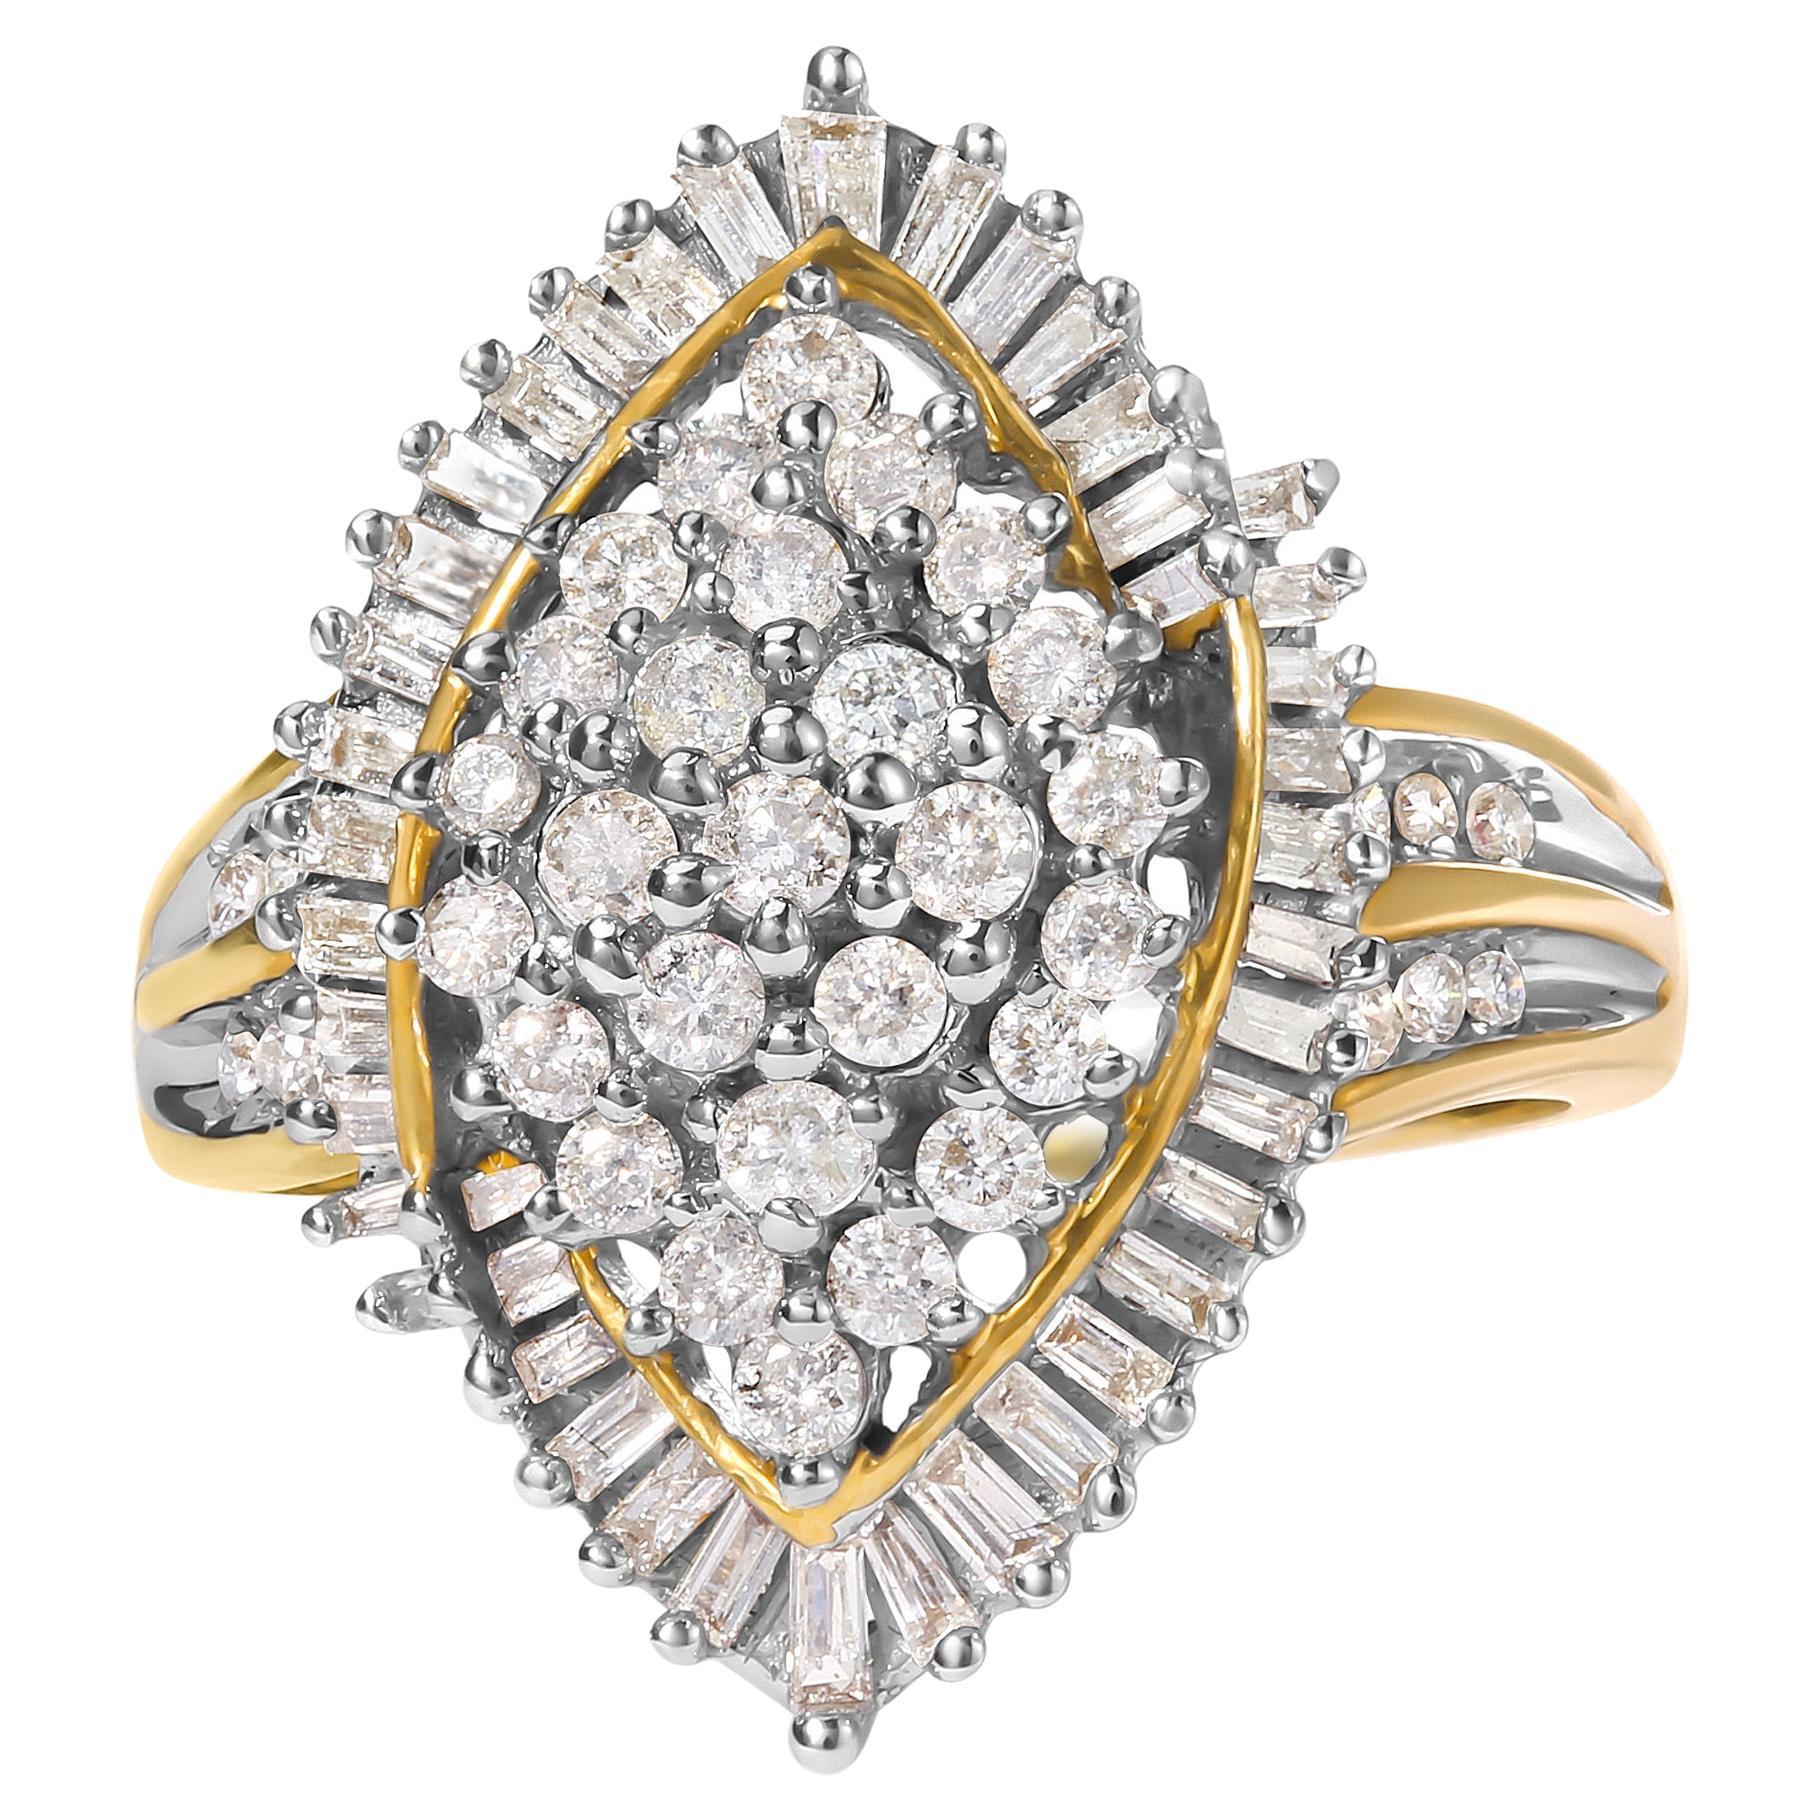 10K Yellow Gold 1.0 Carat Round and Baguette-Cut Diamond Cluster Ring For Sale